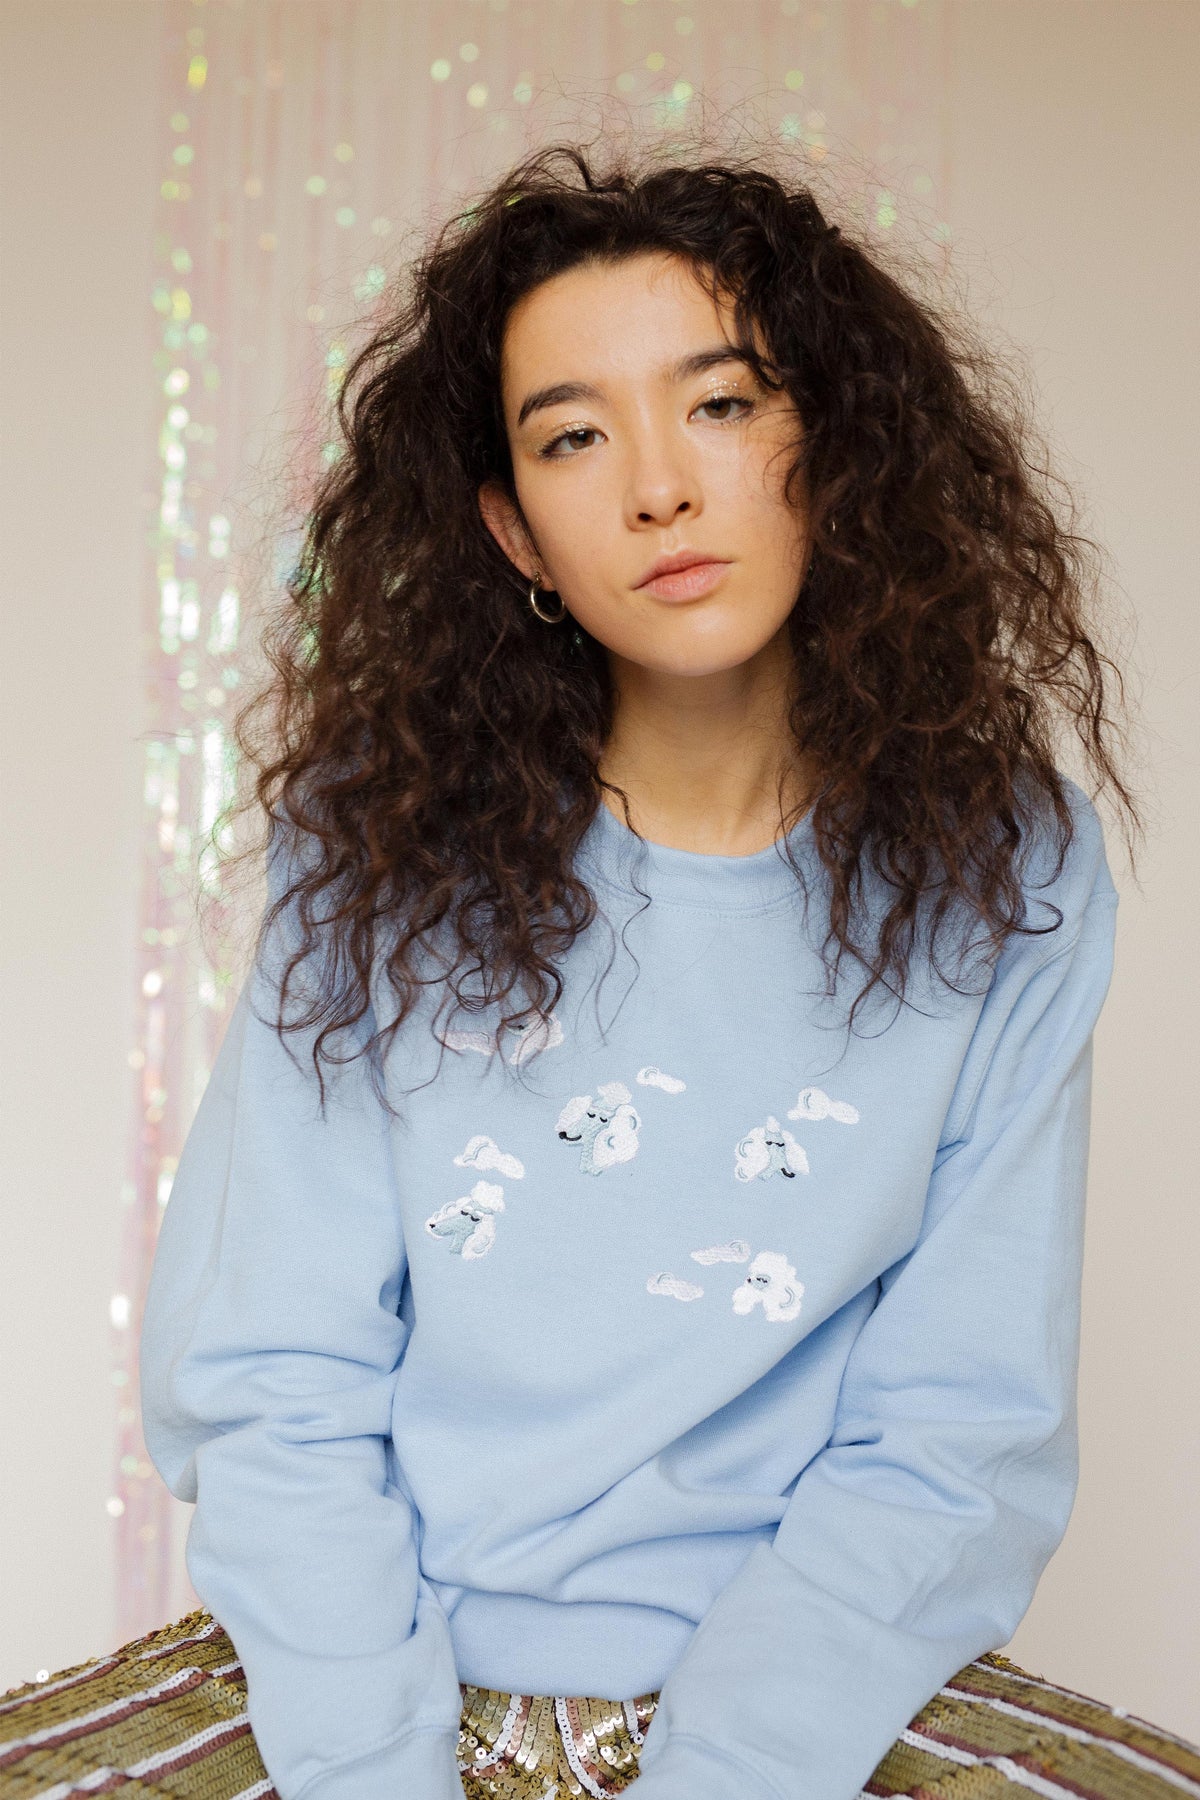 Poodle Clouds Embroidered Sweatshirt